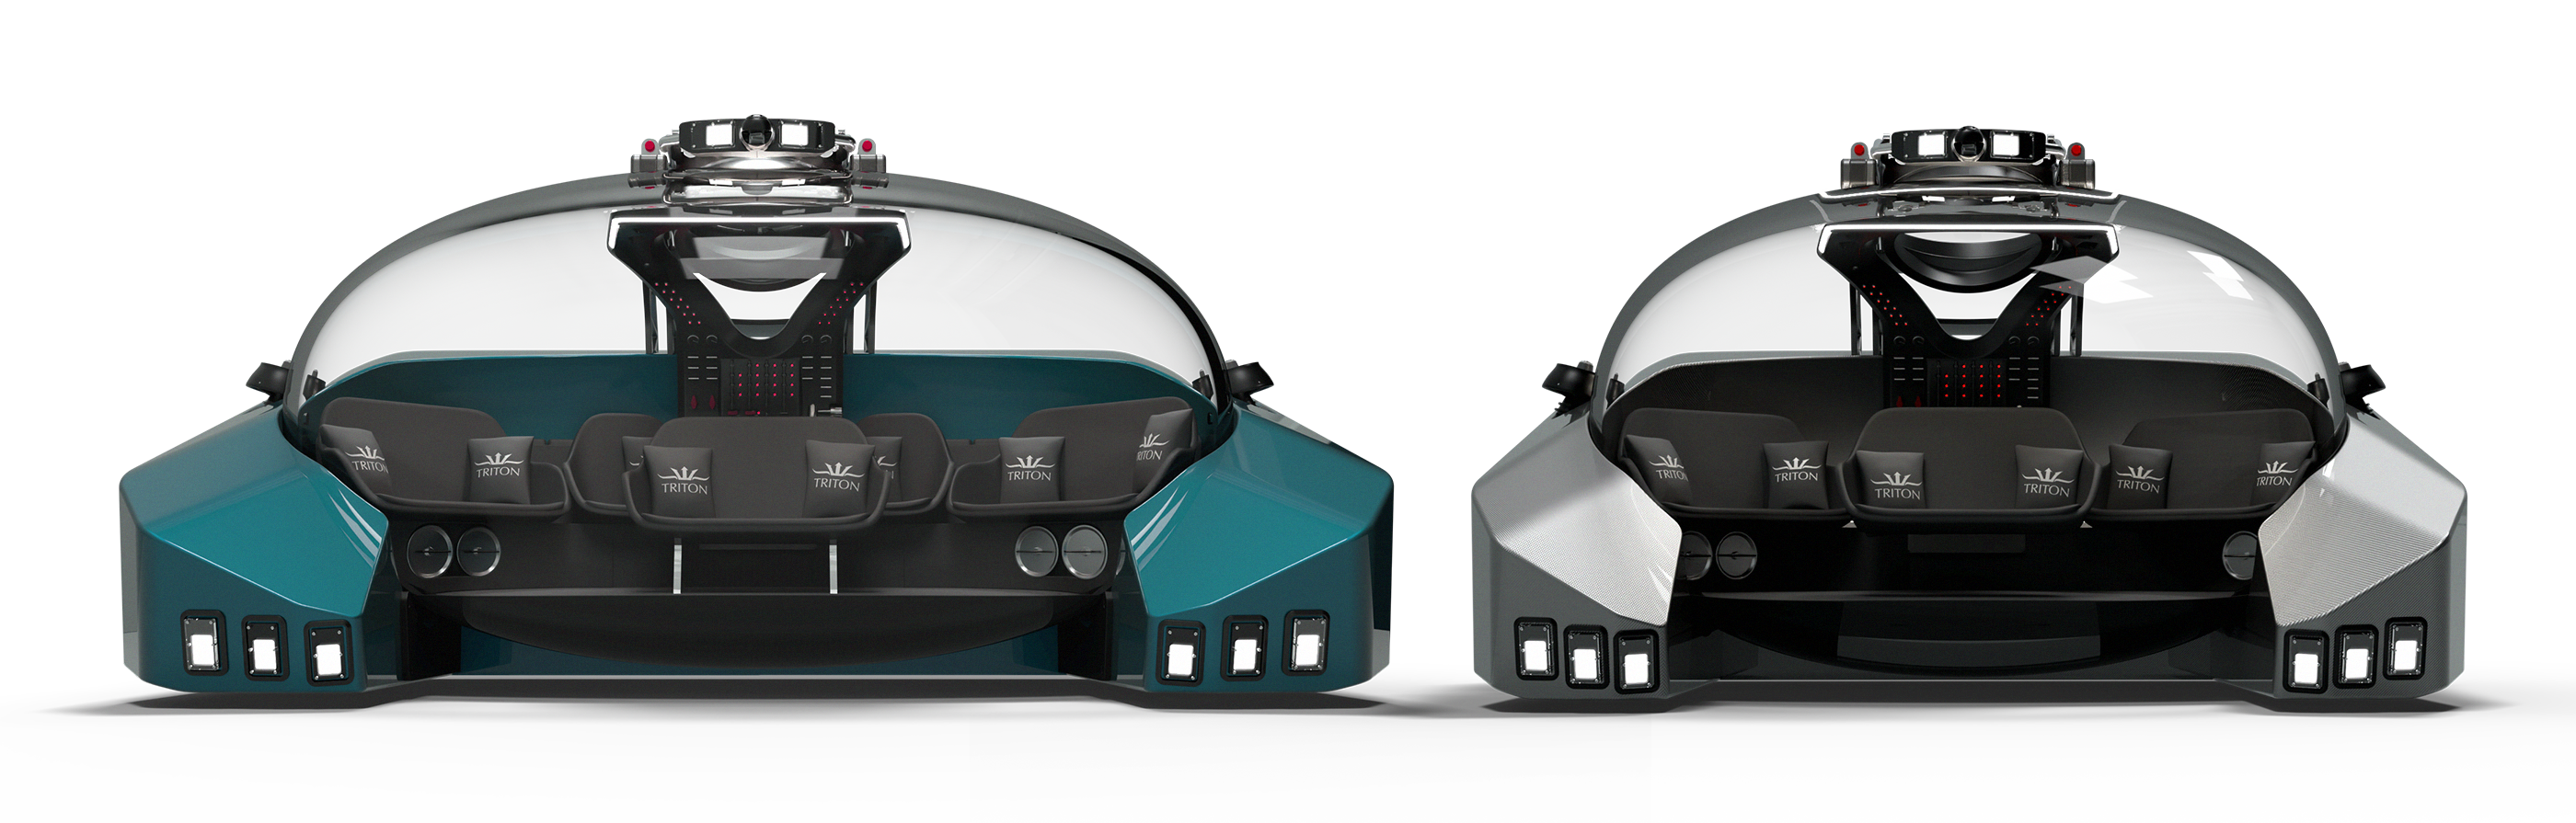 Two TRITON 660 subs with different interior options shown